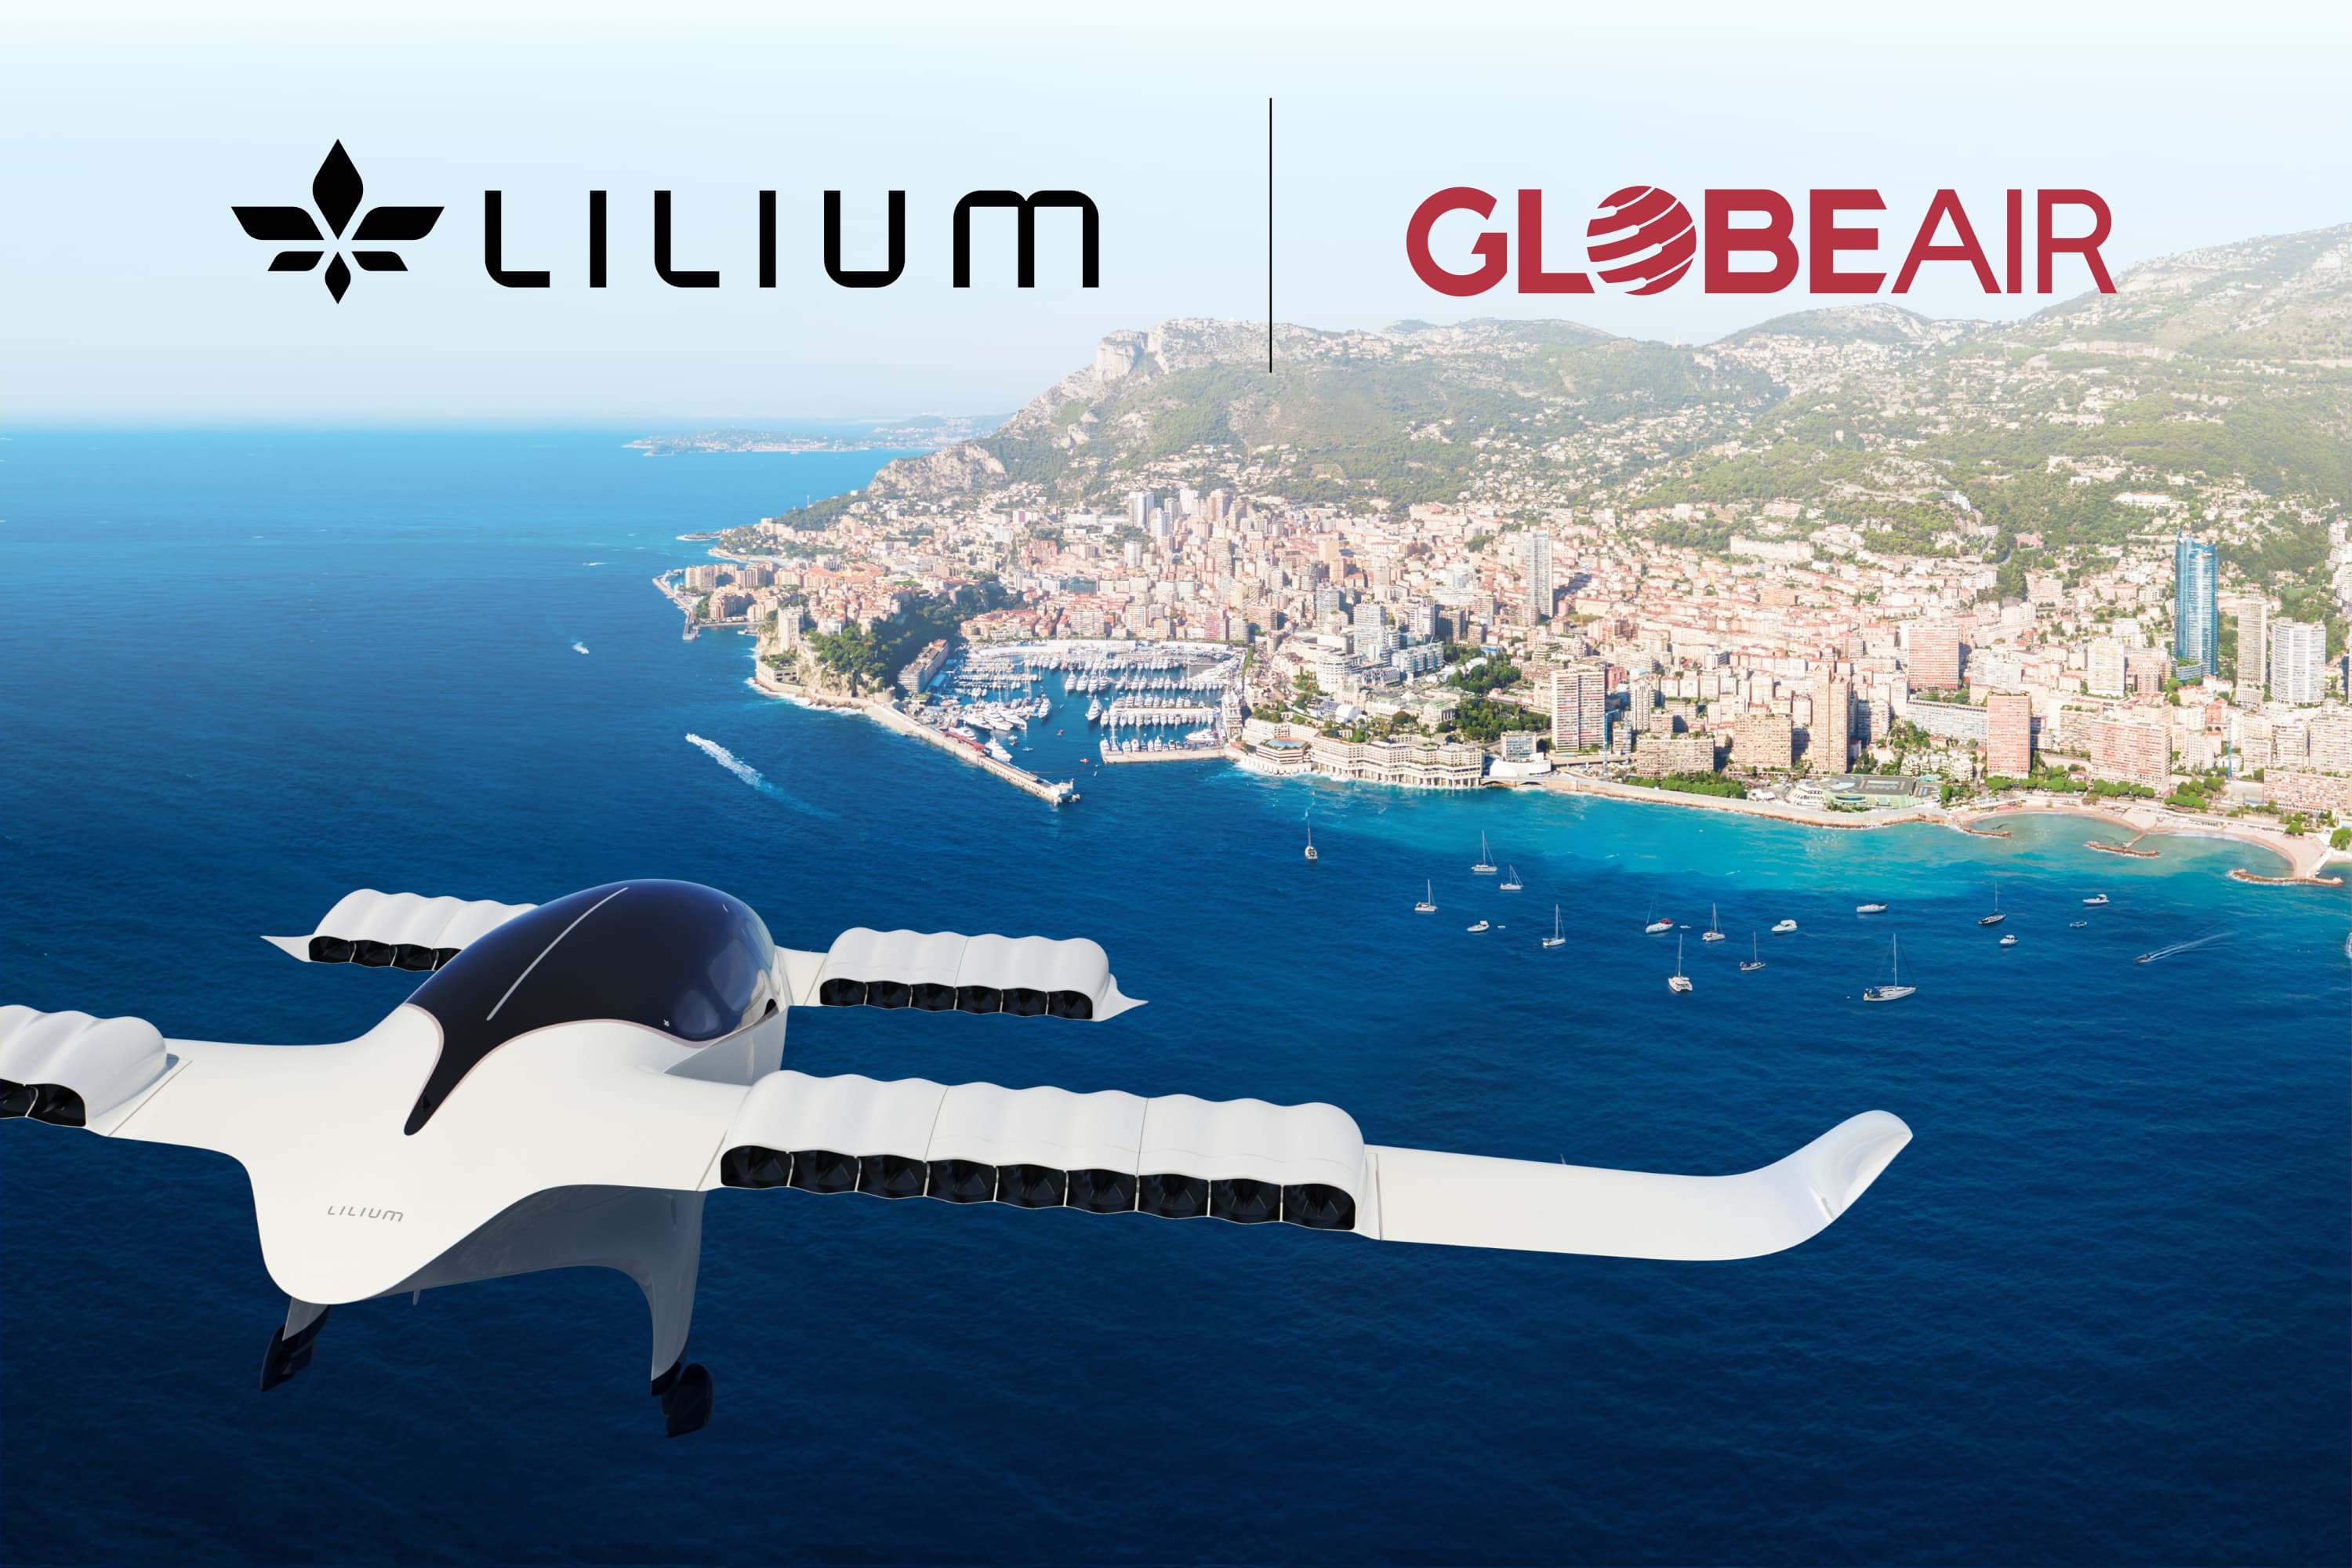 A render of the Lilium Jet flying into Monaco to announce Lilium and GlobeAir